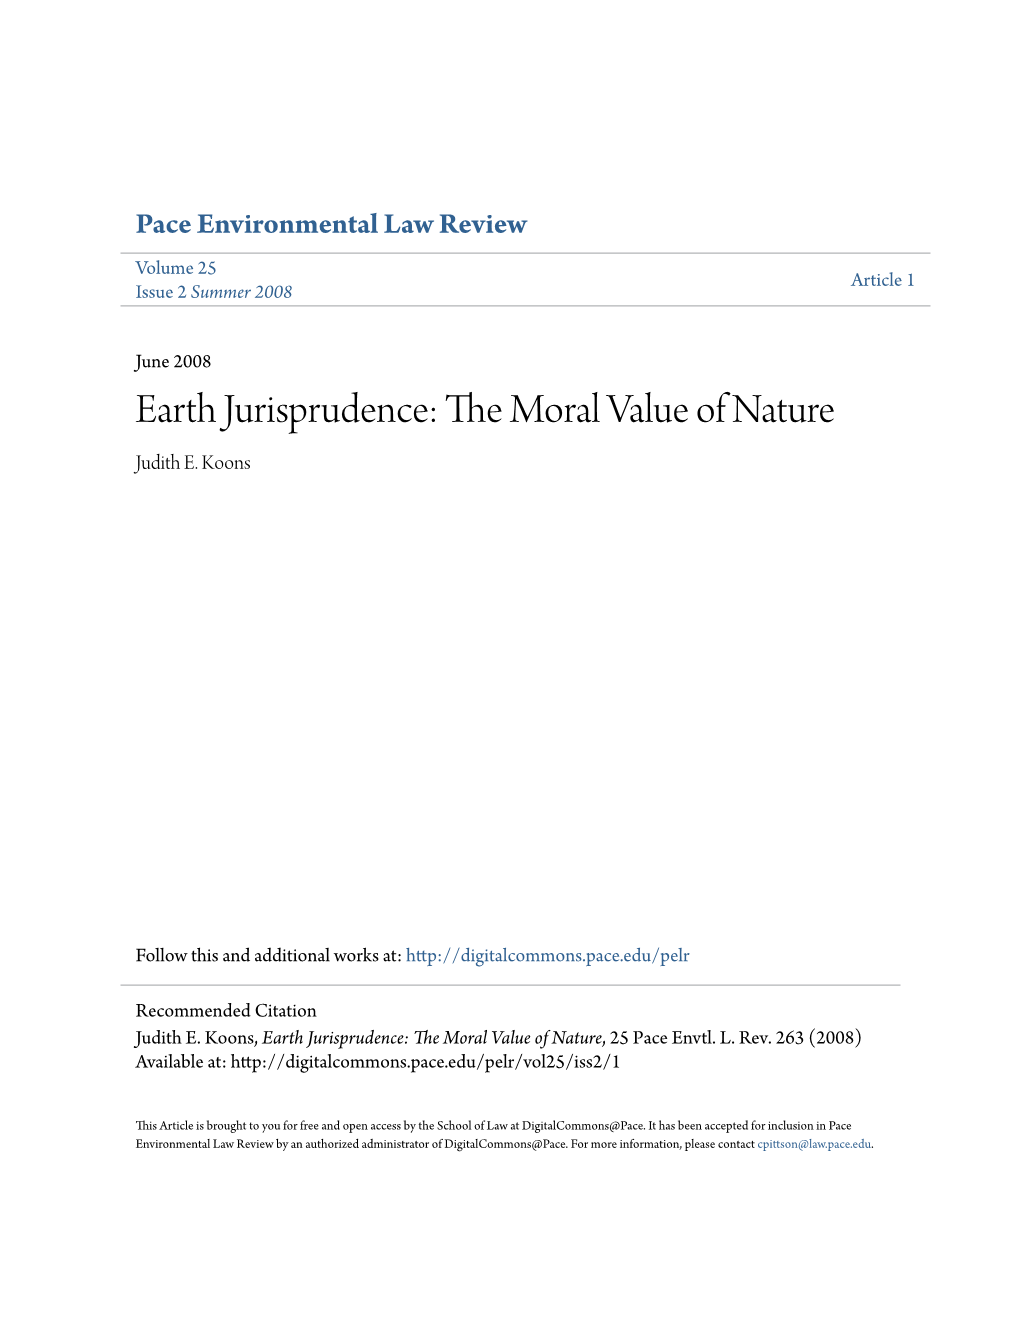 Earth Jurisprudence: the Moral Value of Nature, 25 Pace Envtl